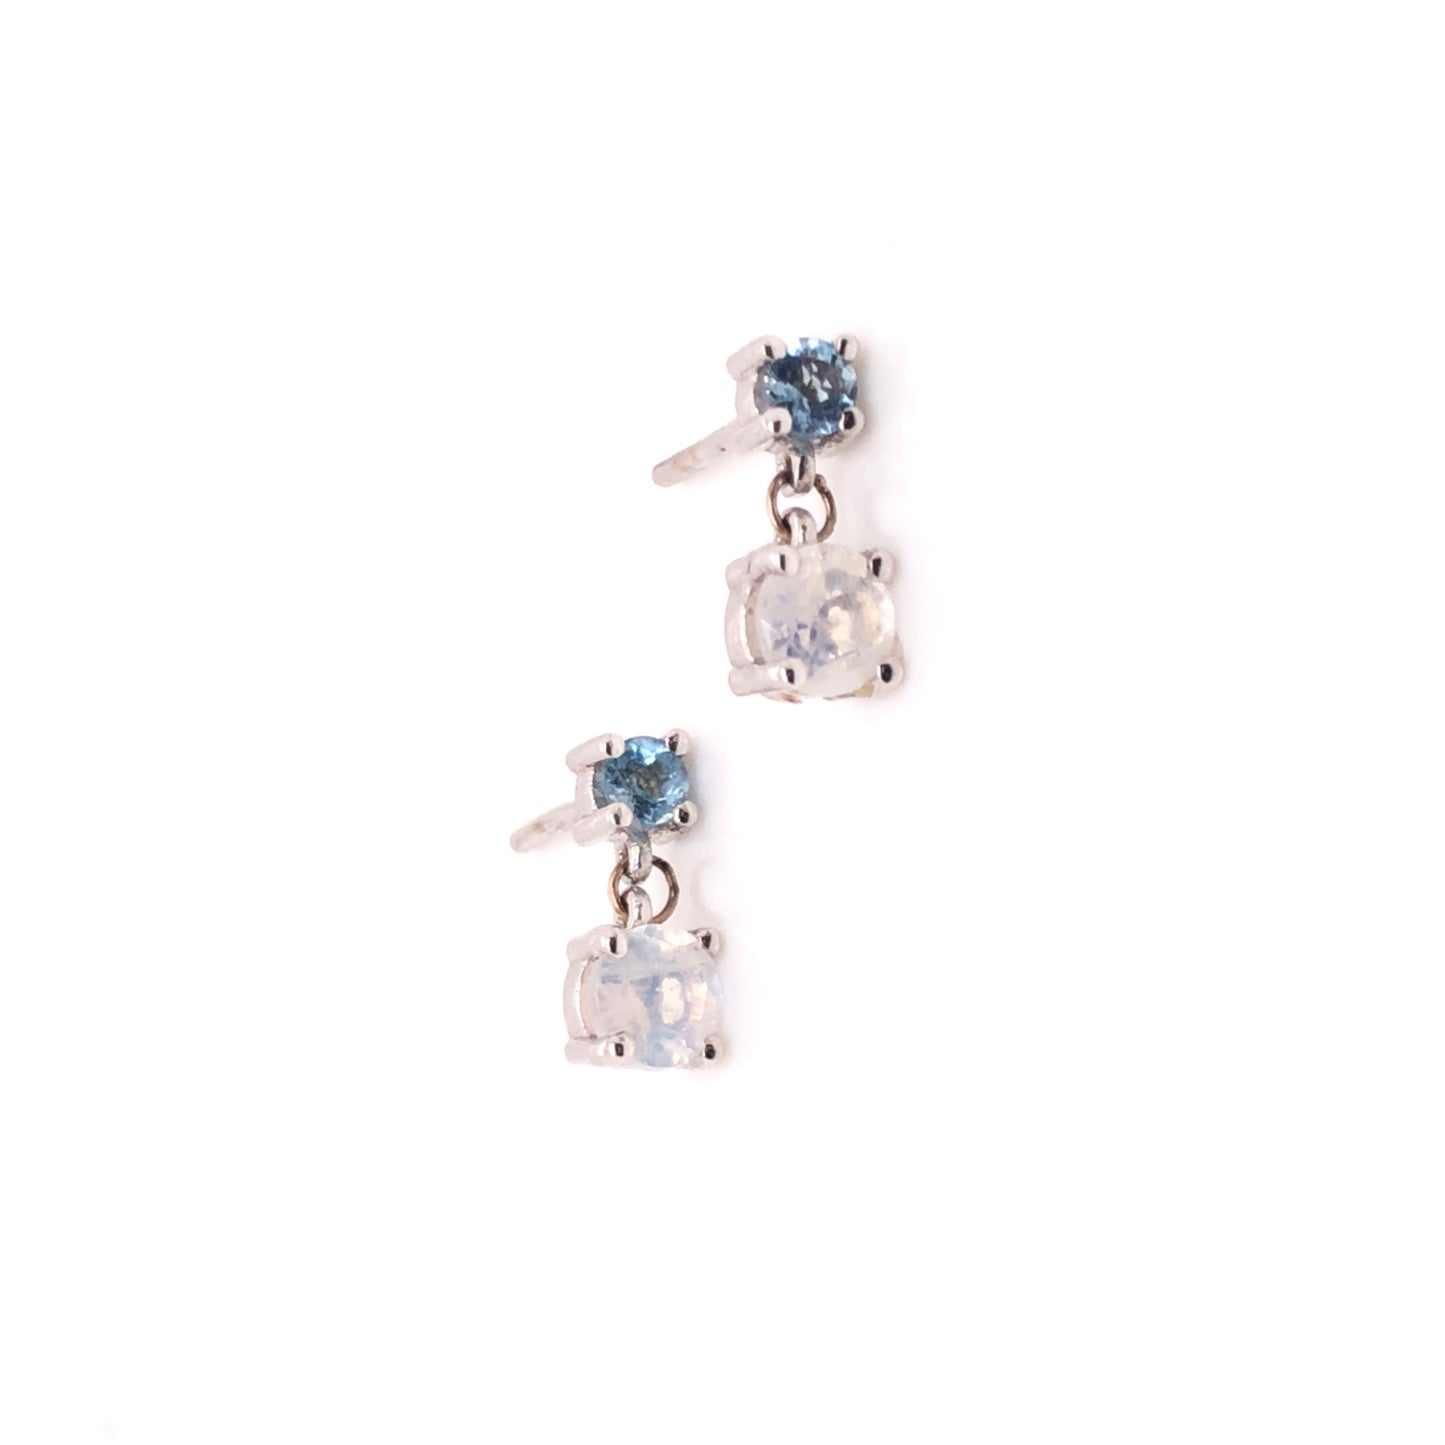 IMMEDIATE DELIVERY / Moonstone and Aquamarine Dangle Earrings / 14k White Gold / Pair